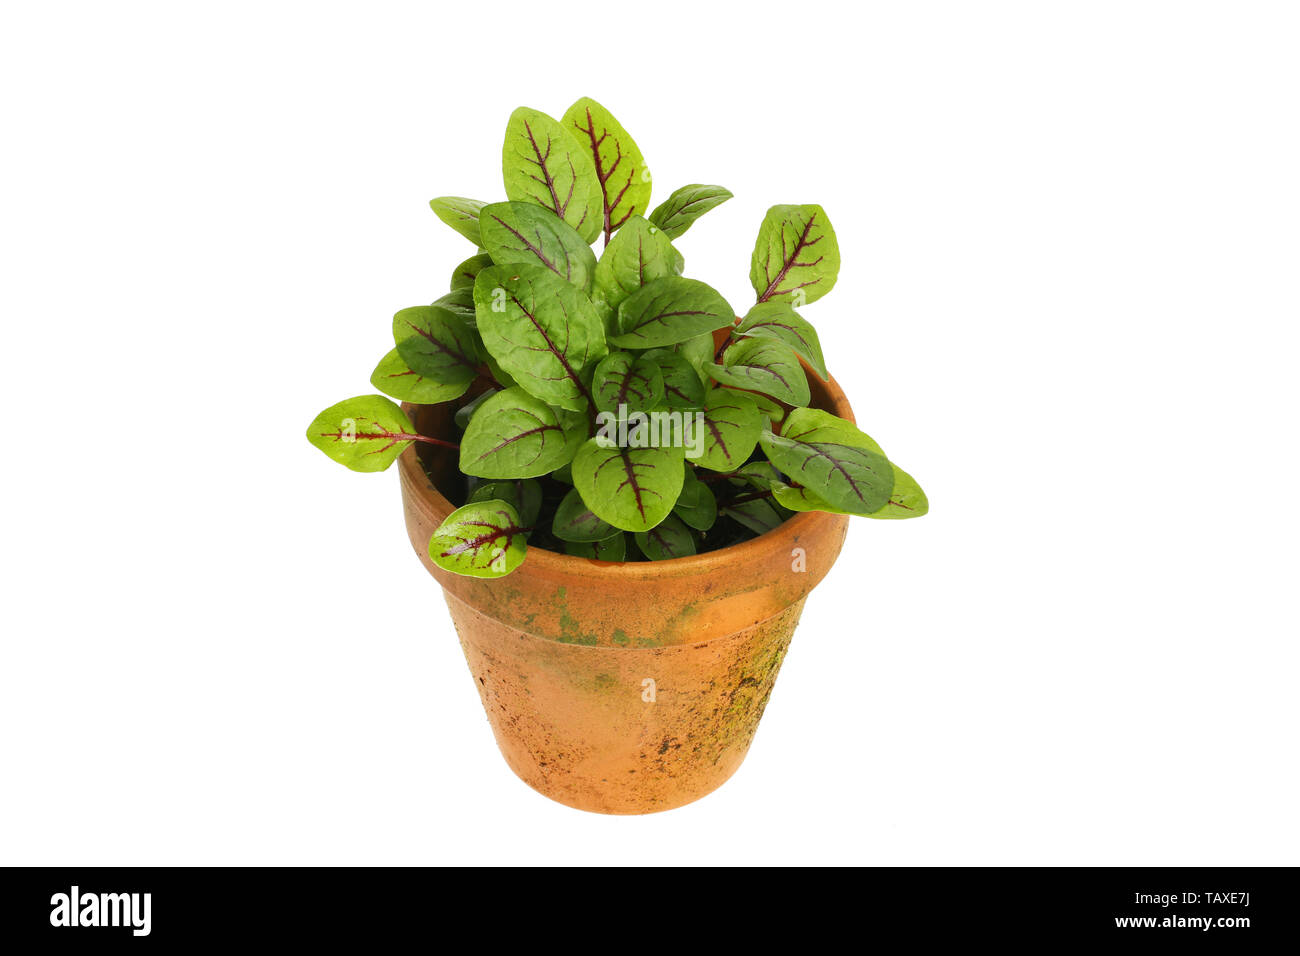 Red-veined sorrel, Rumex sanguineus, herb in a terracotta plant pot isolated against white Stock Photo